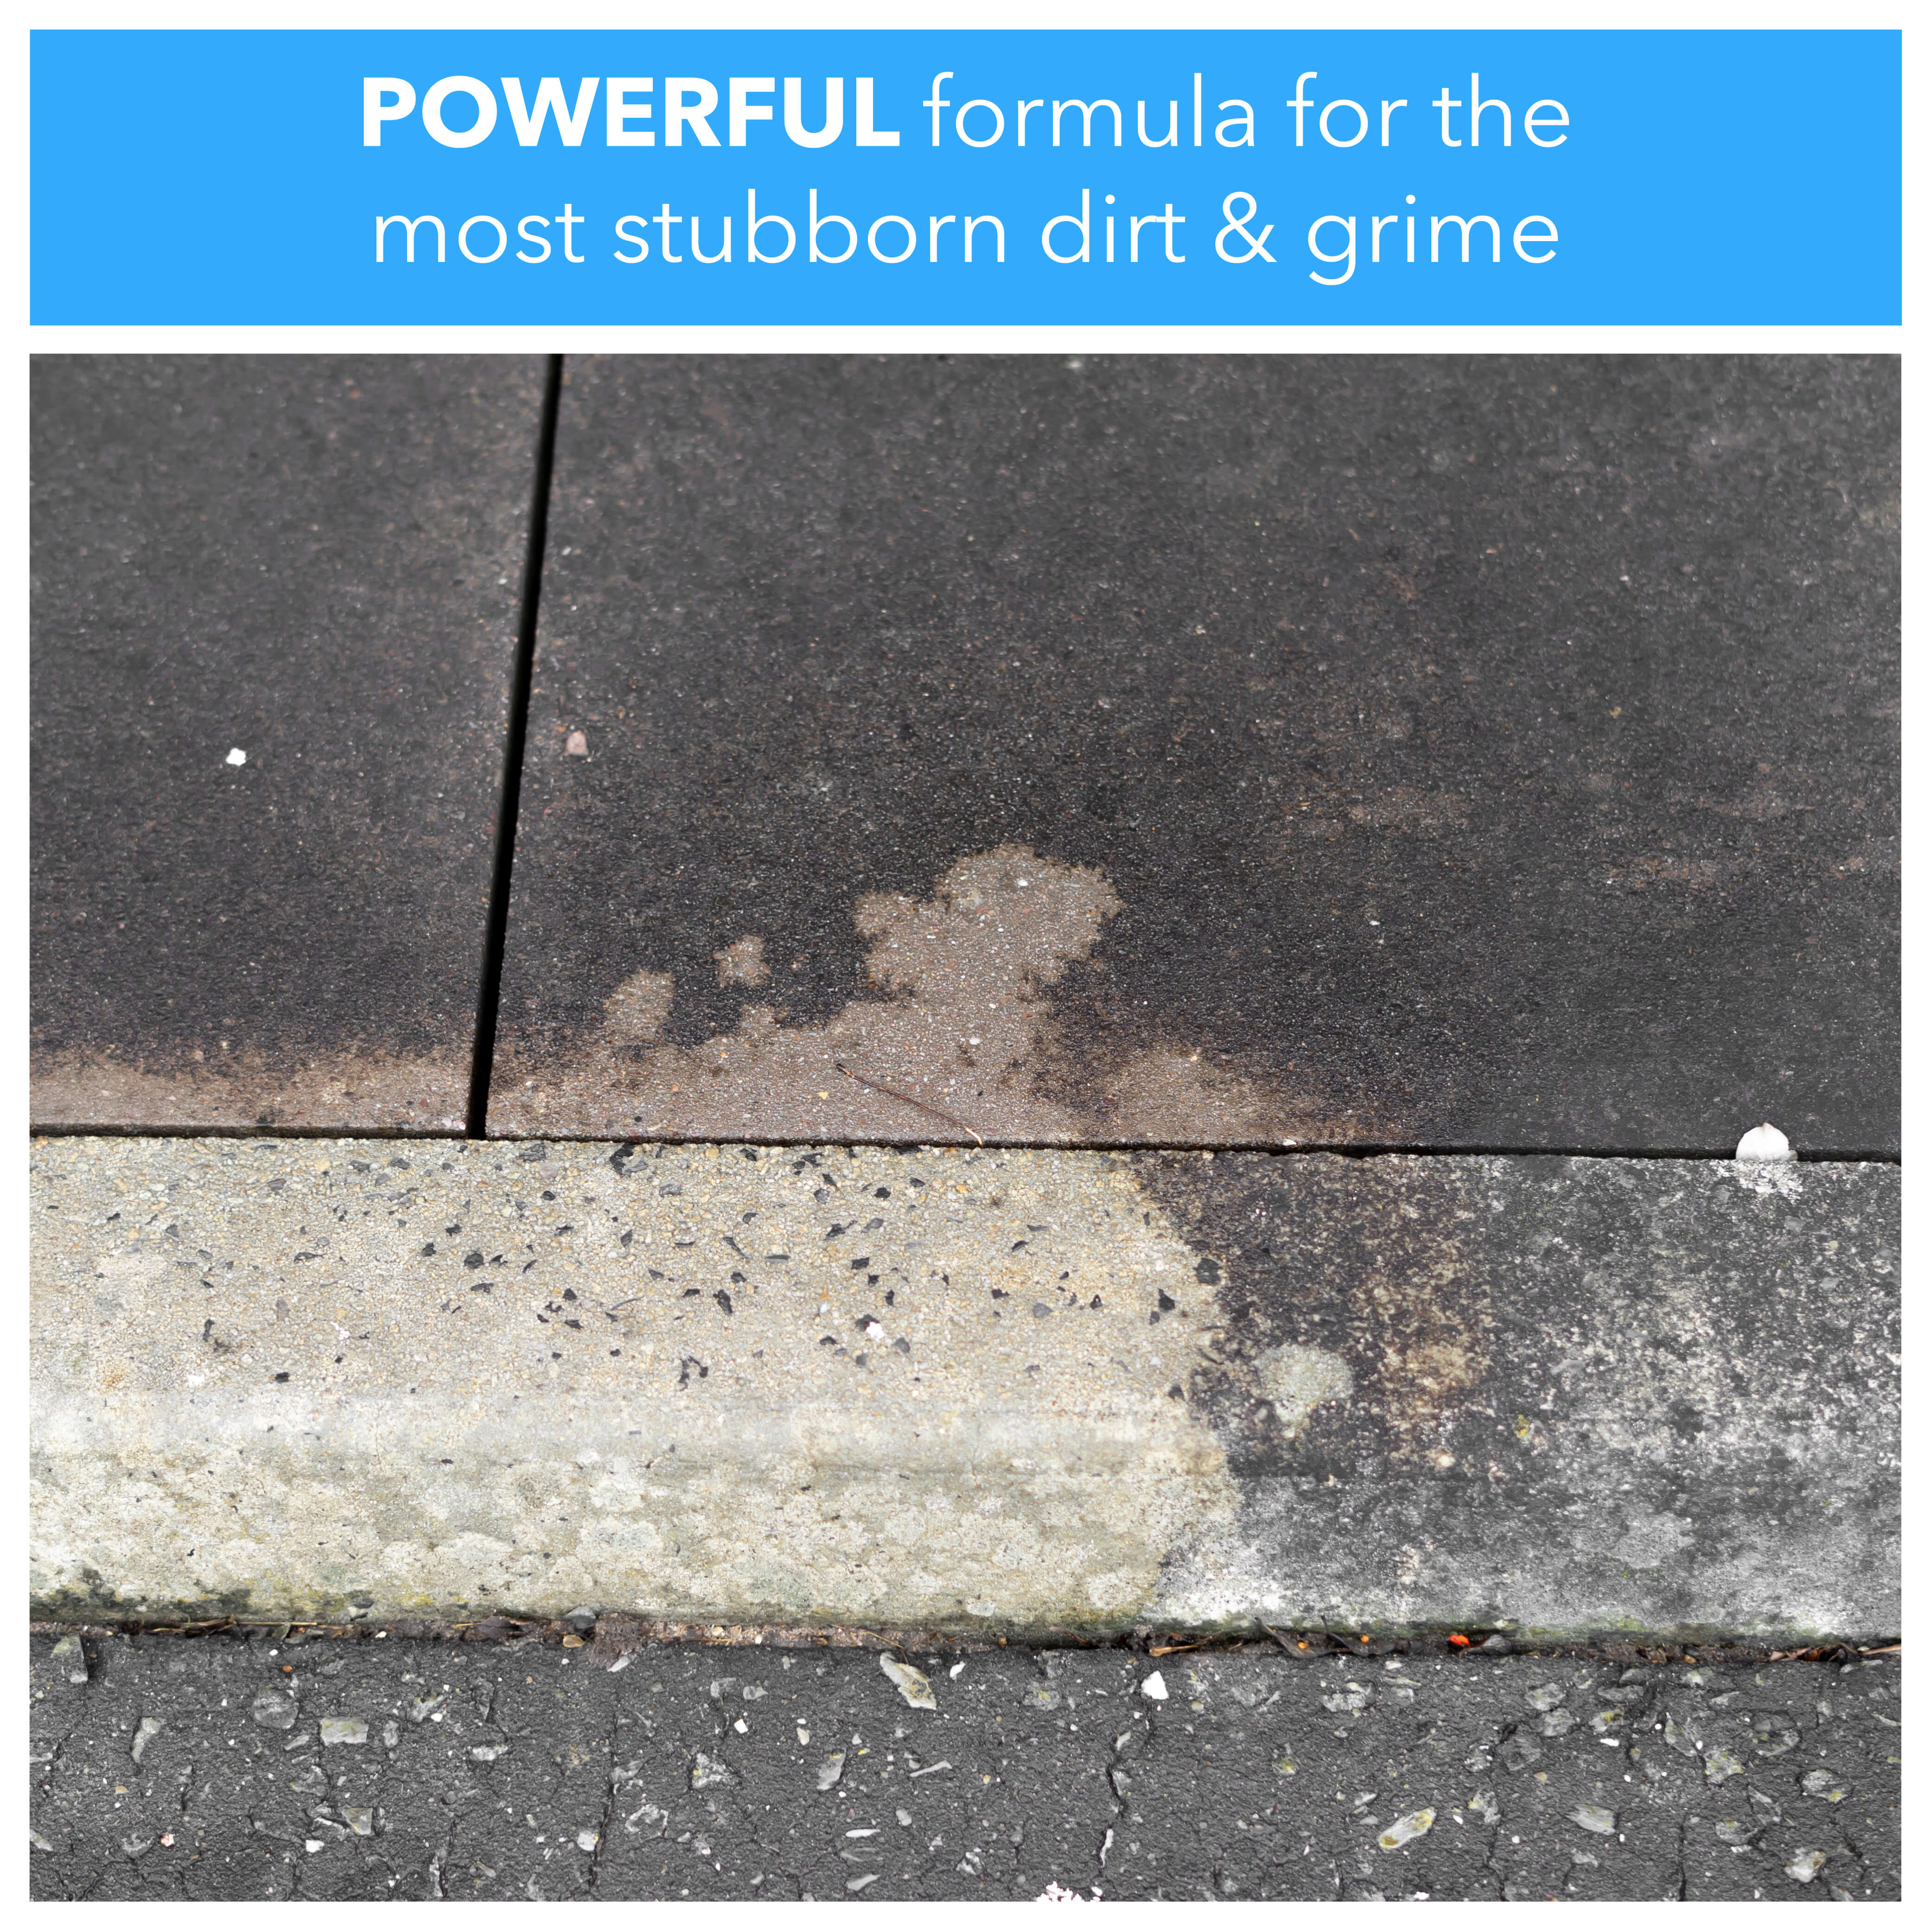 Powerful formula for the most stubborn dirt & grime